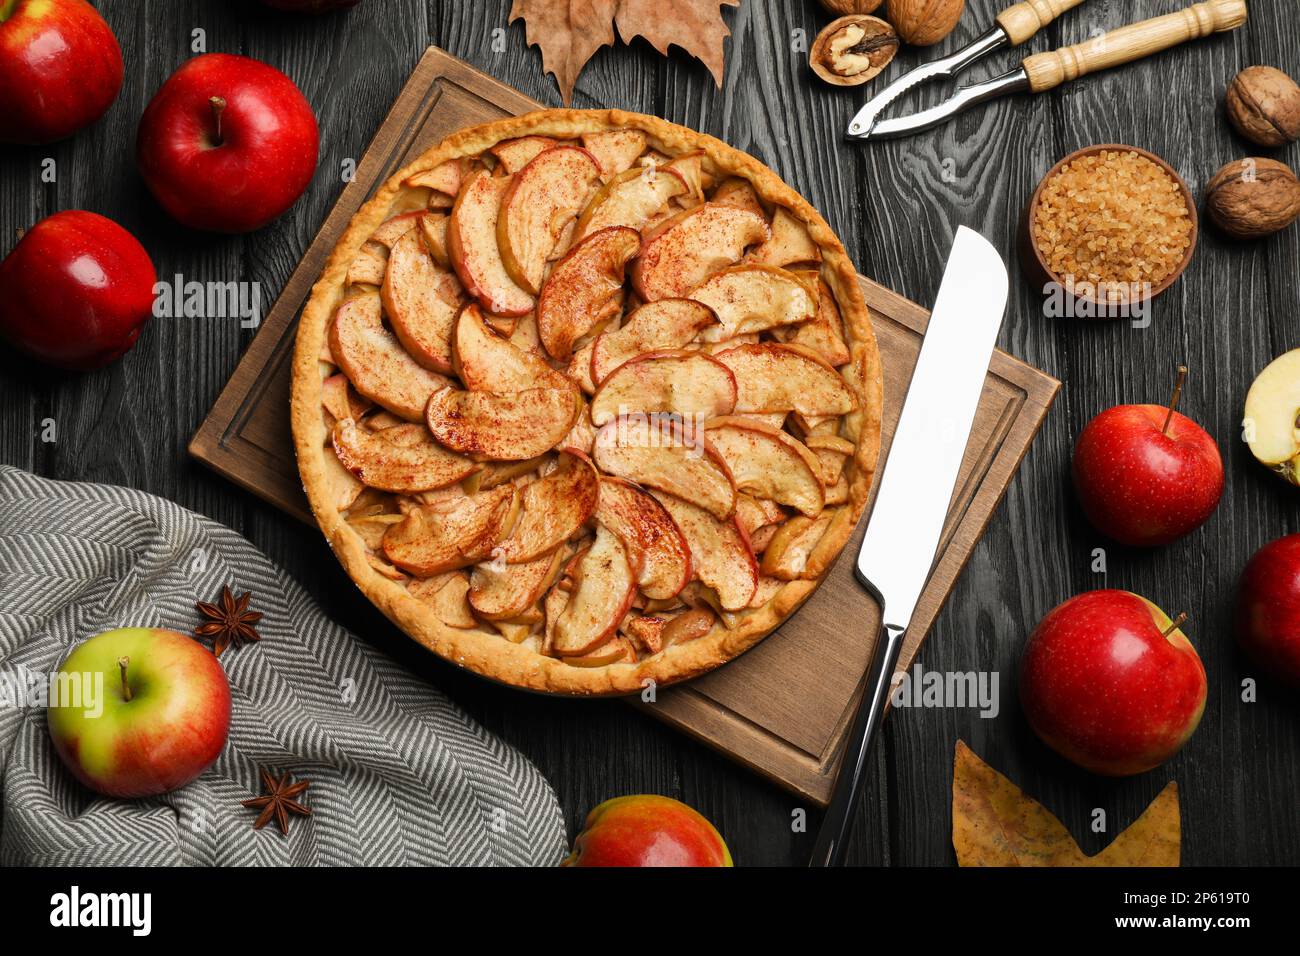 Delicious apple pie and ingredients on black wooden table, flat lay Stock Photo